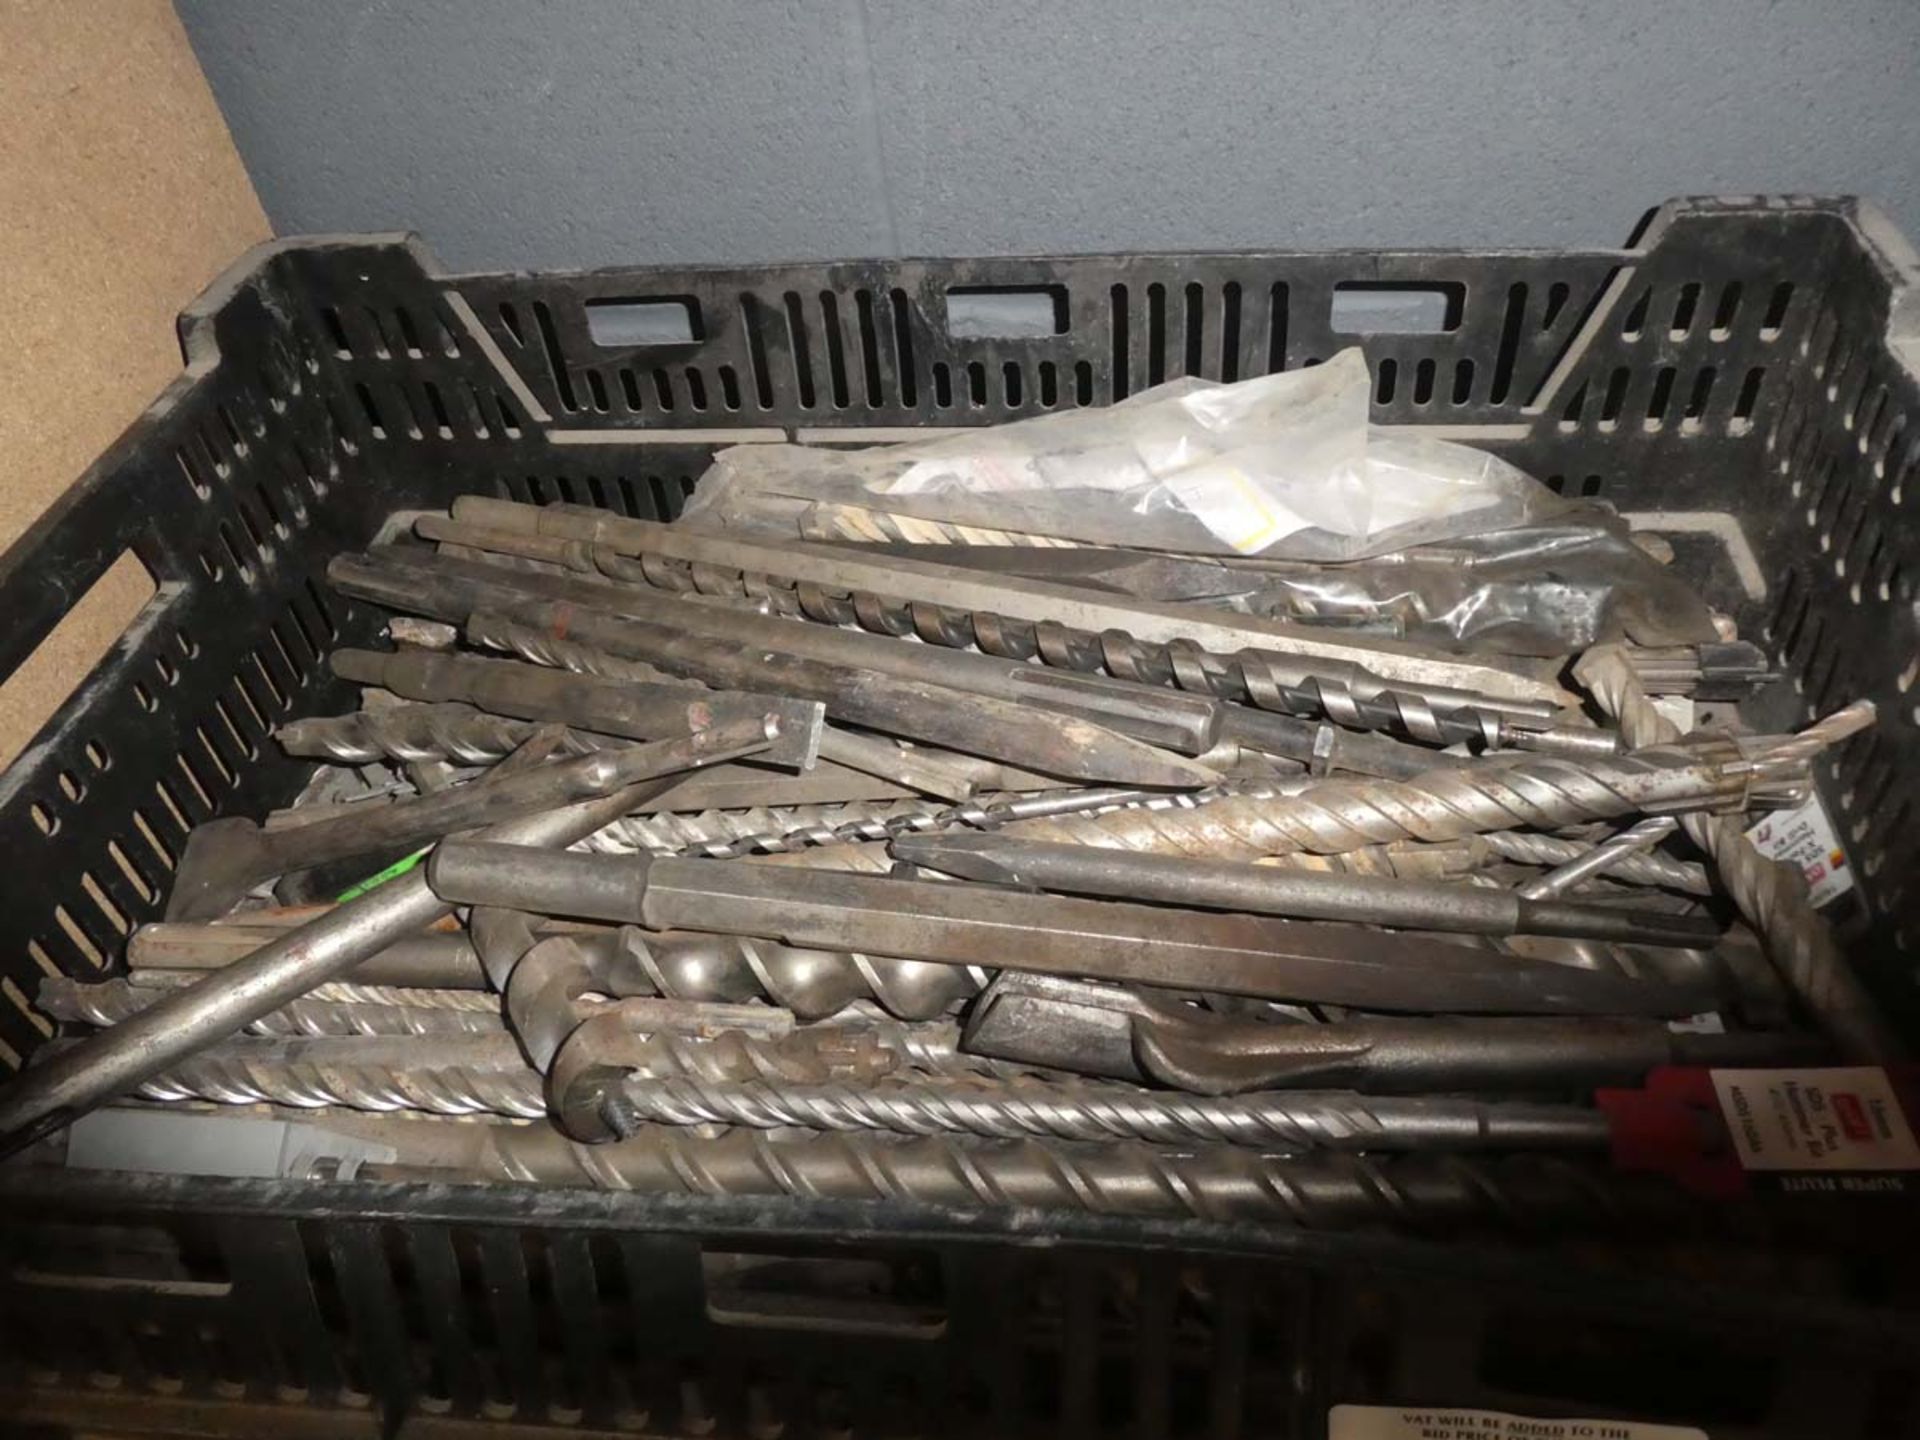 Large box of assorted points, chisels, and SDS drill bits